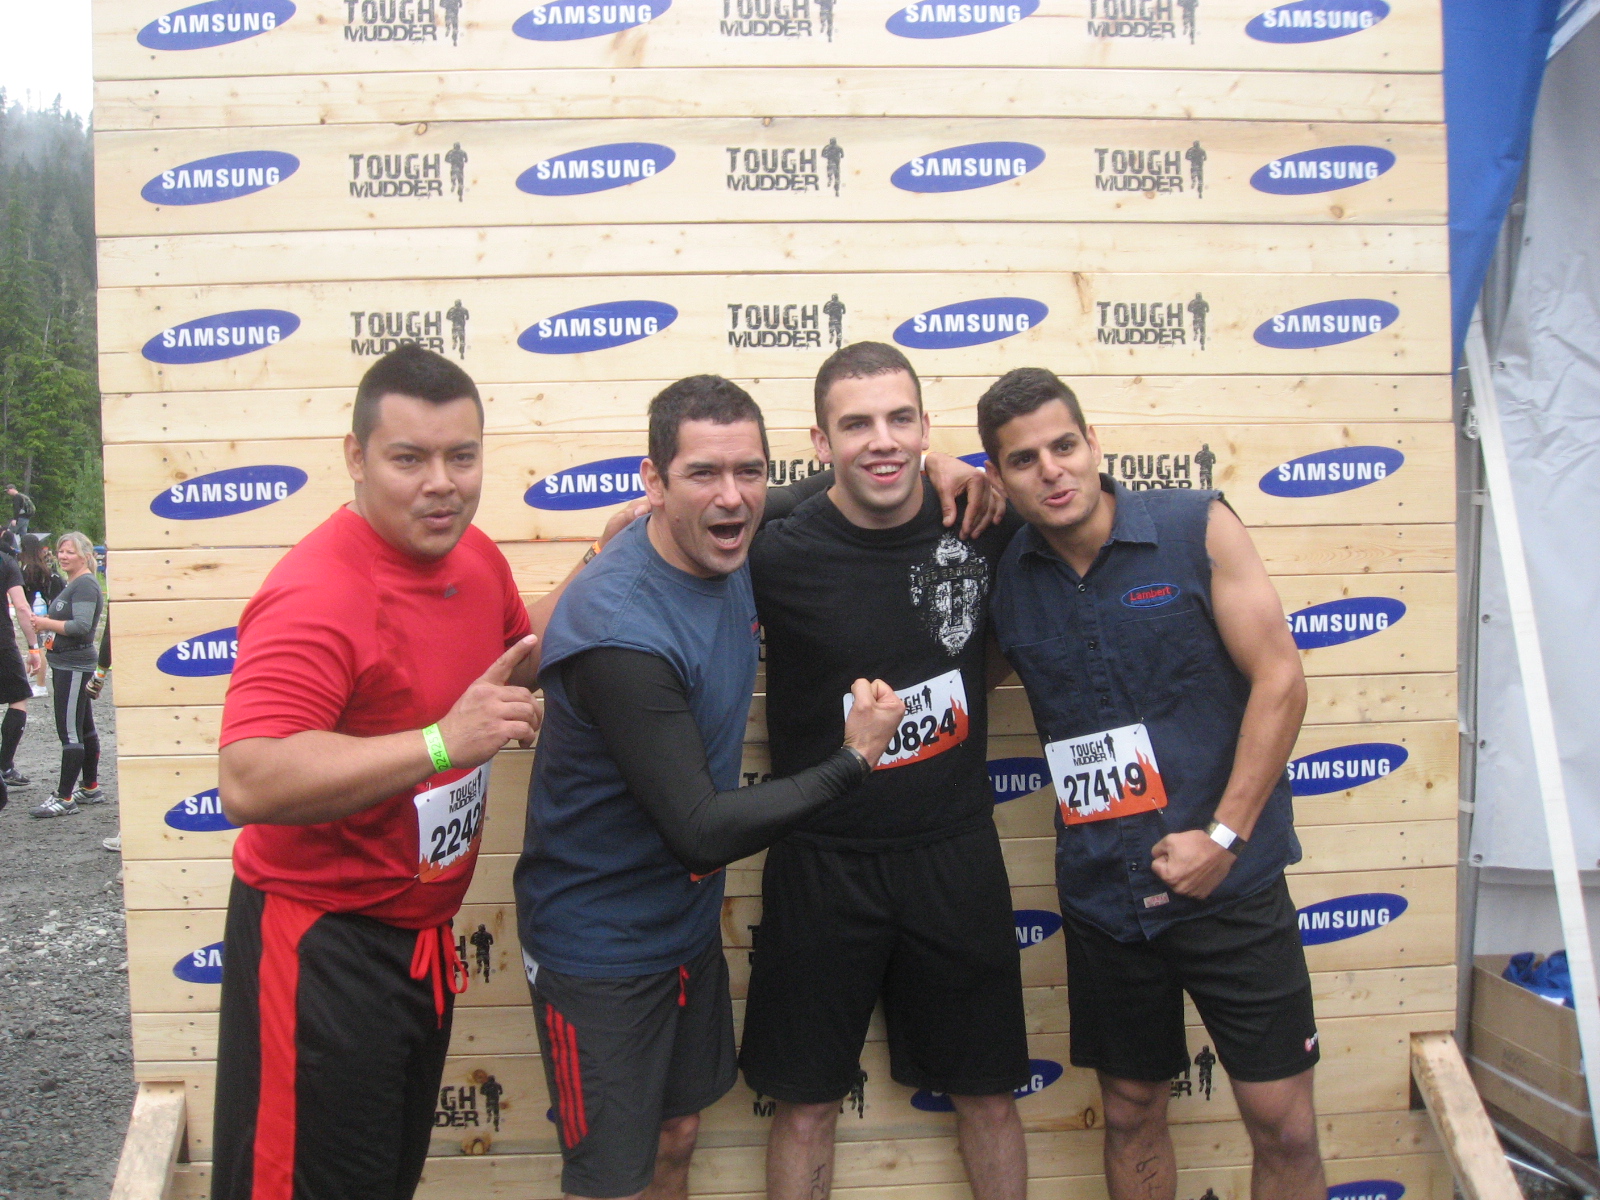 Tough Mudder Competition Pic - Getting Pumped Up!